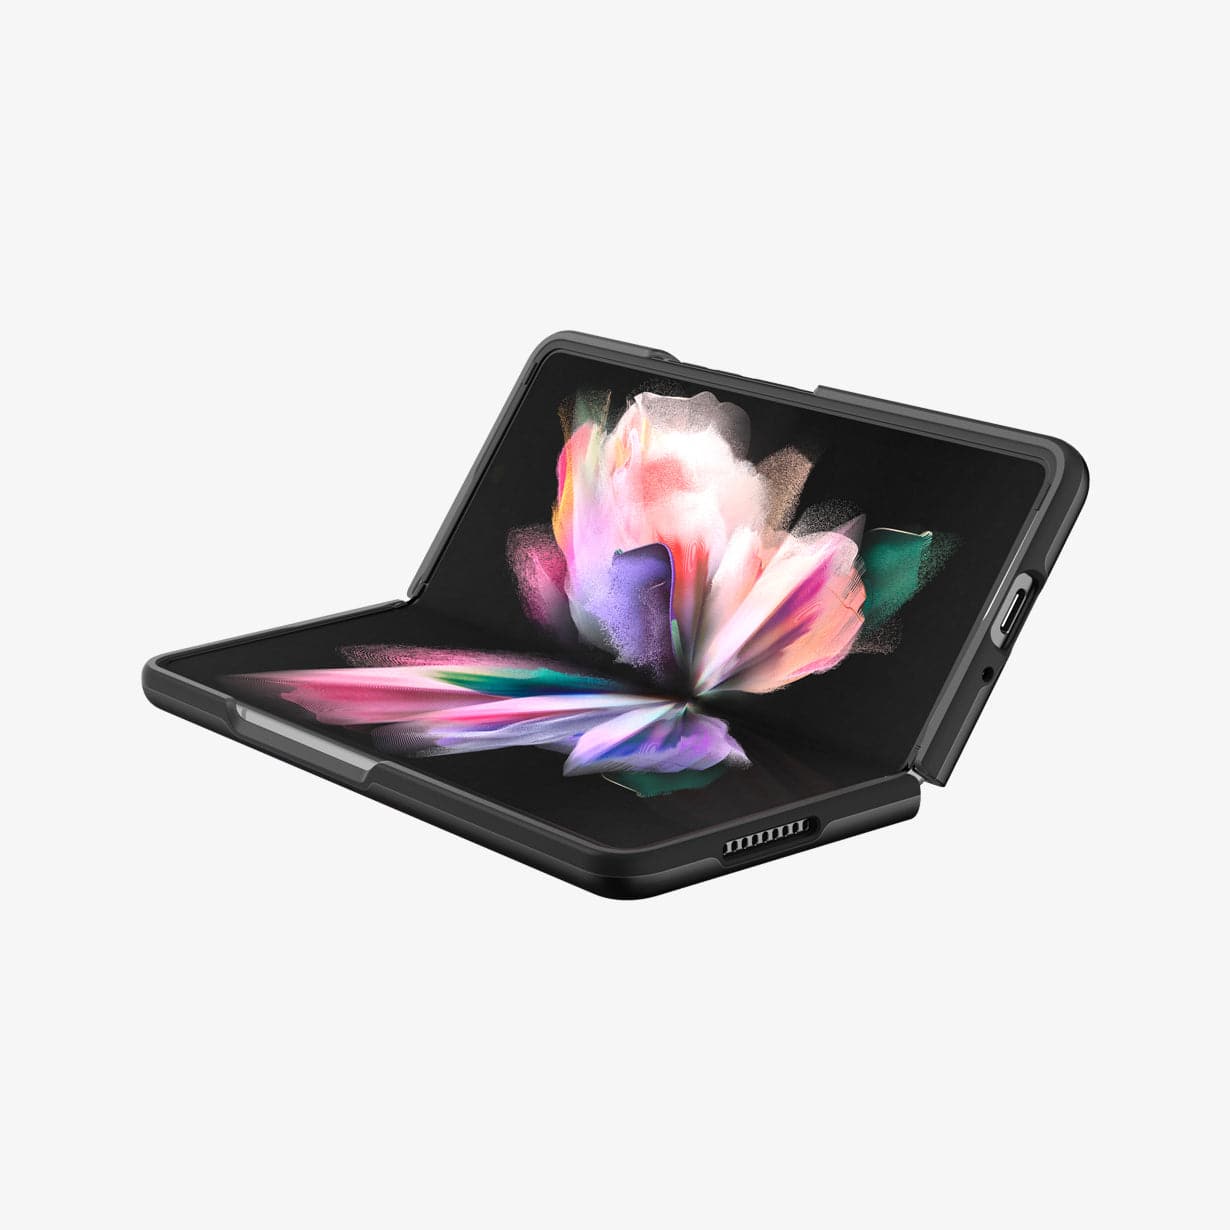 ACS03075 - Galaxy Z Fold 3 Case Thin Fit in black showing the inside, bottom, and side